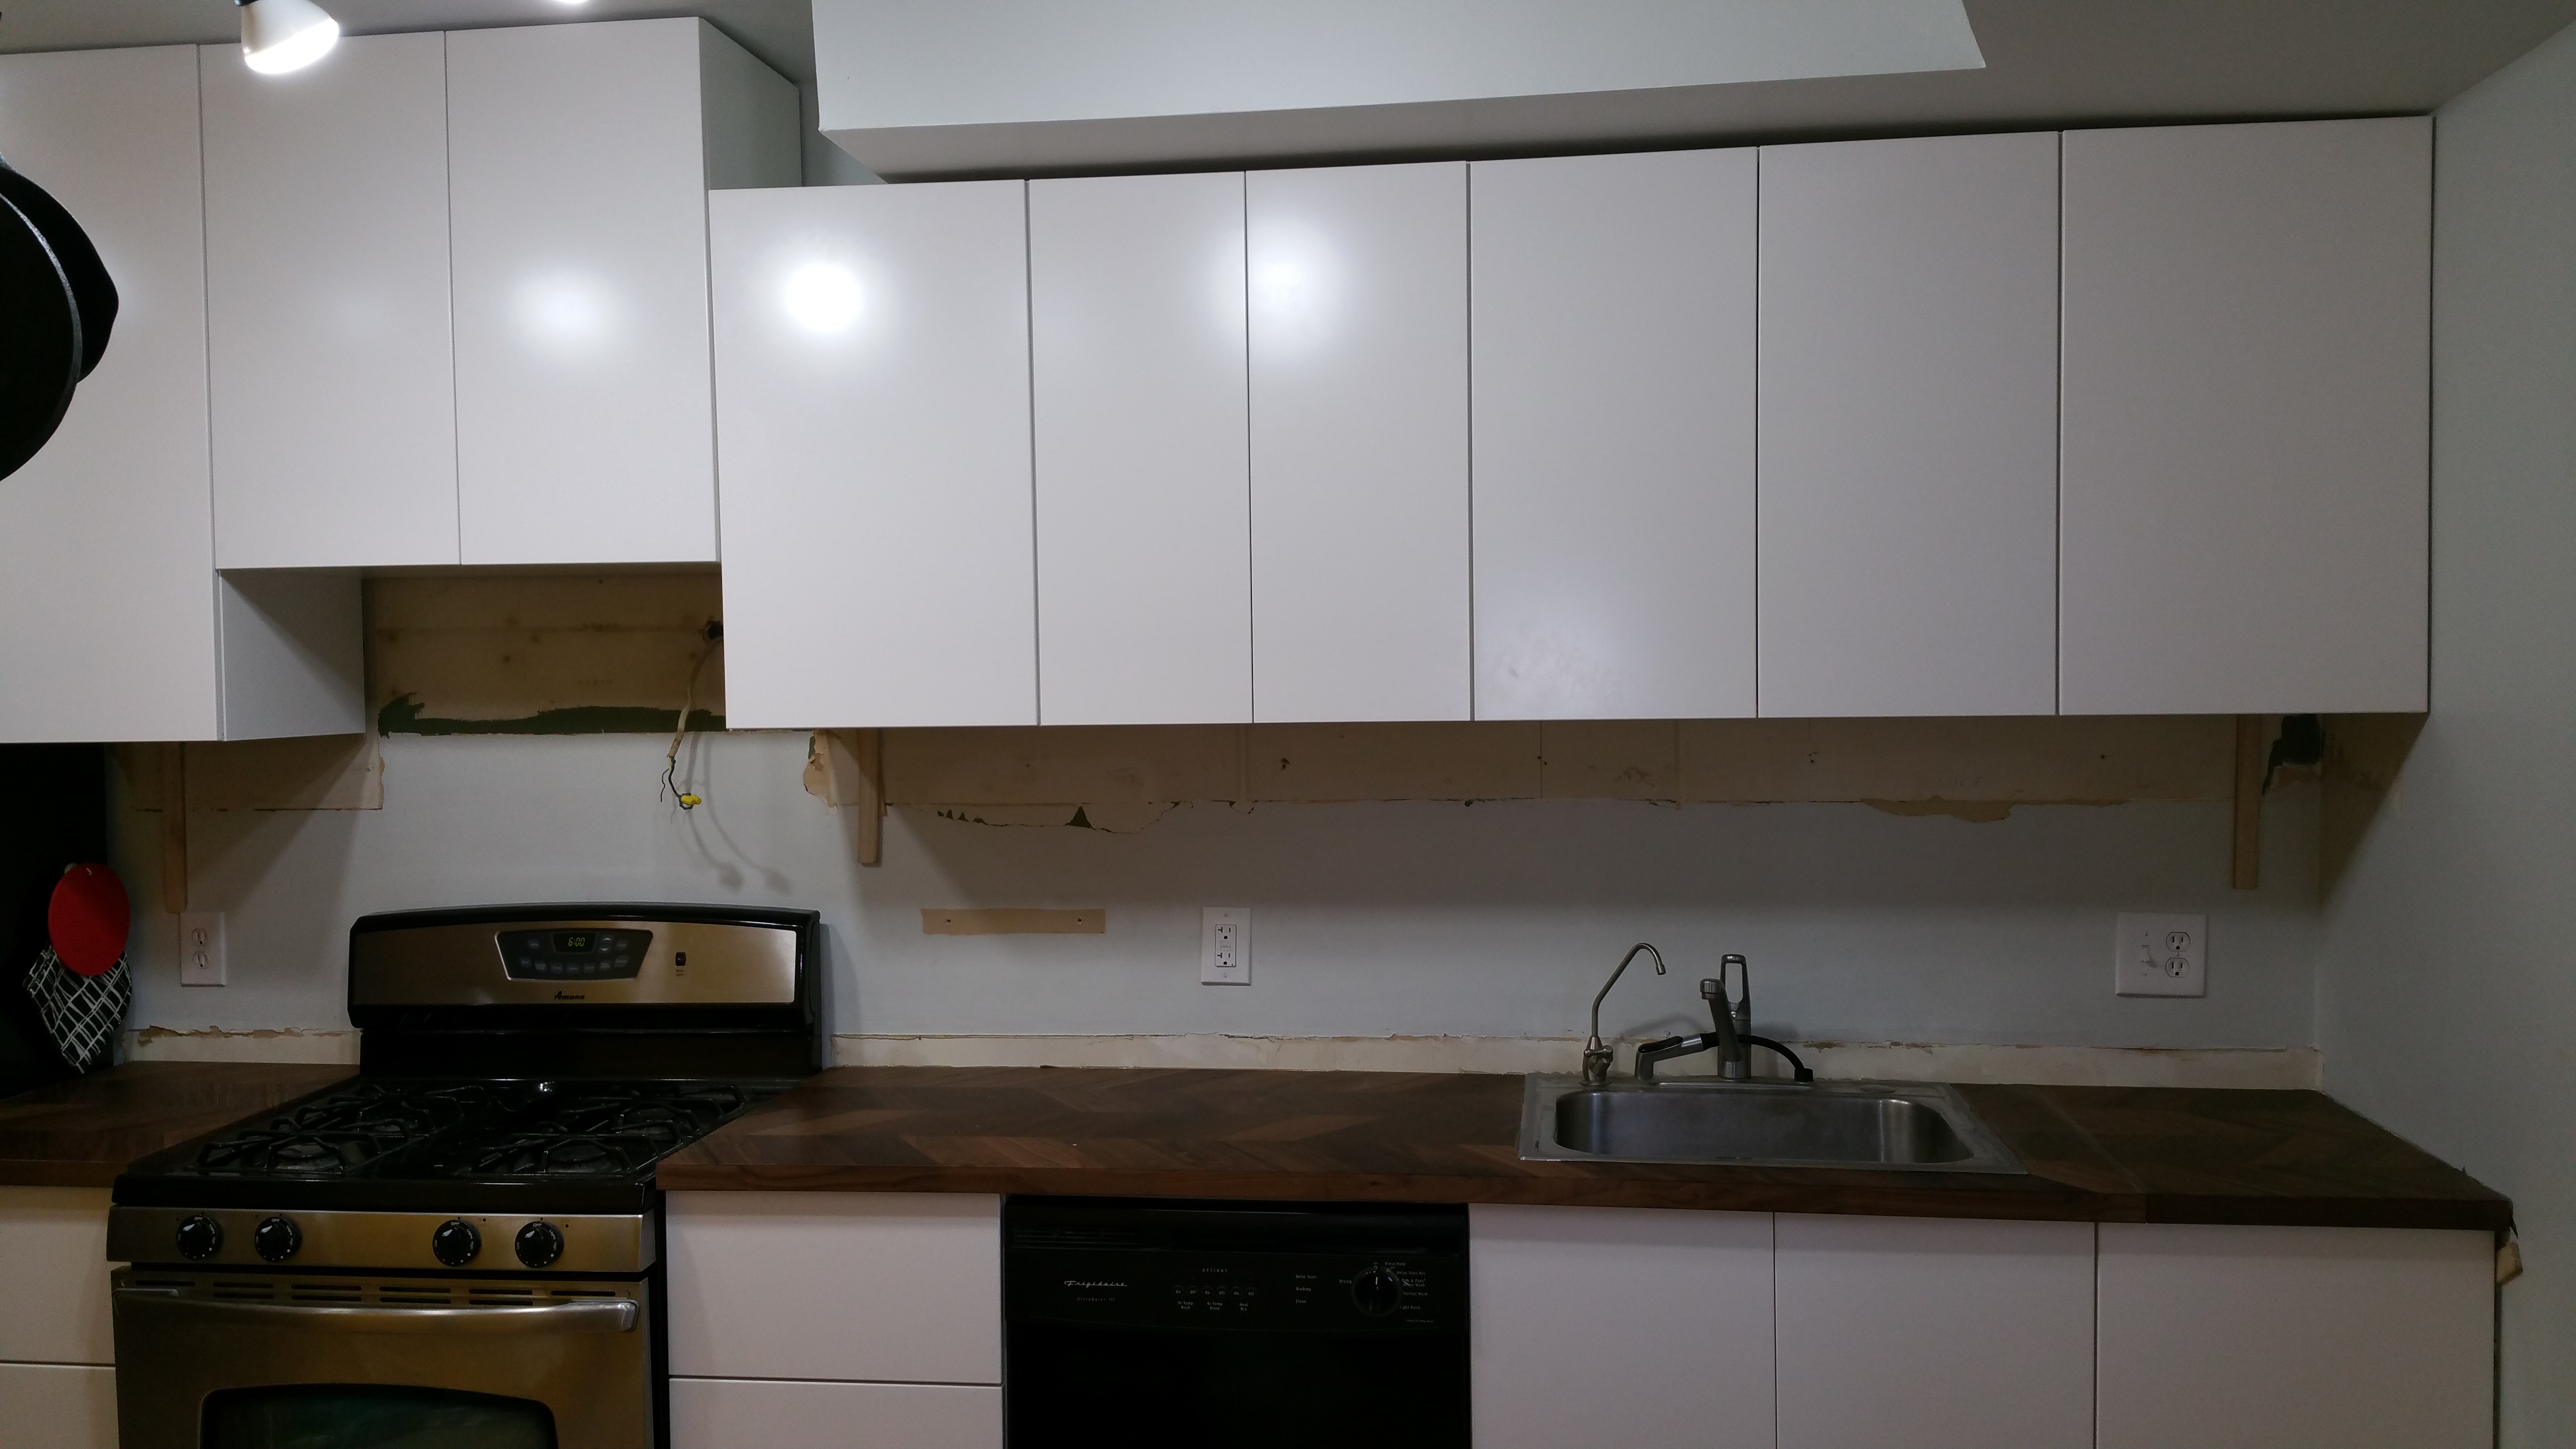 Any Assembly Installs Ikea Kitchens In Maryland Virginia And Dc